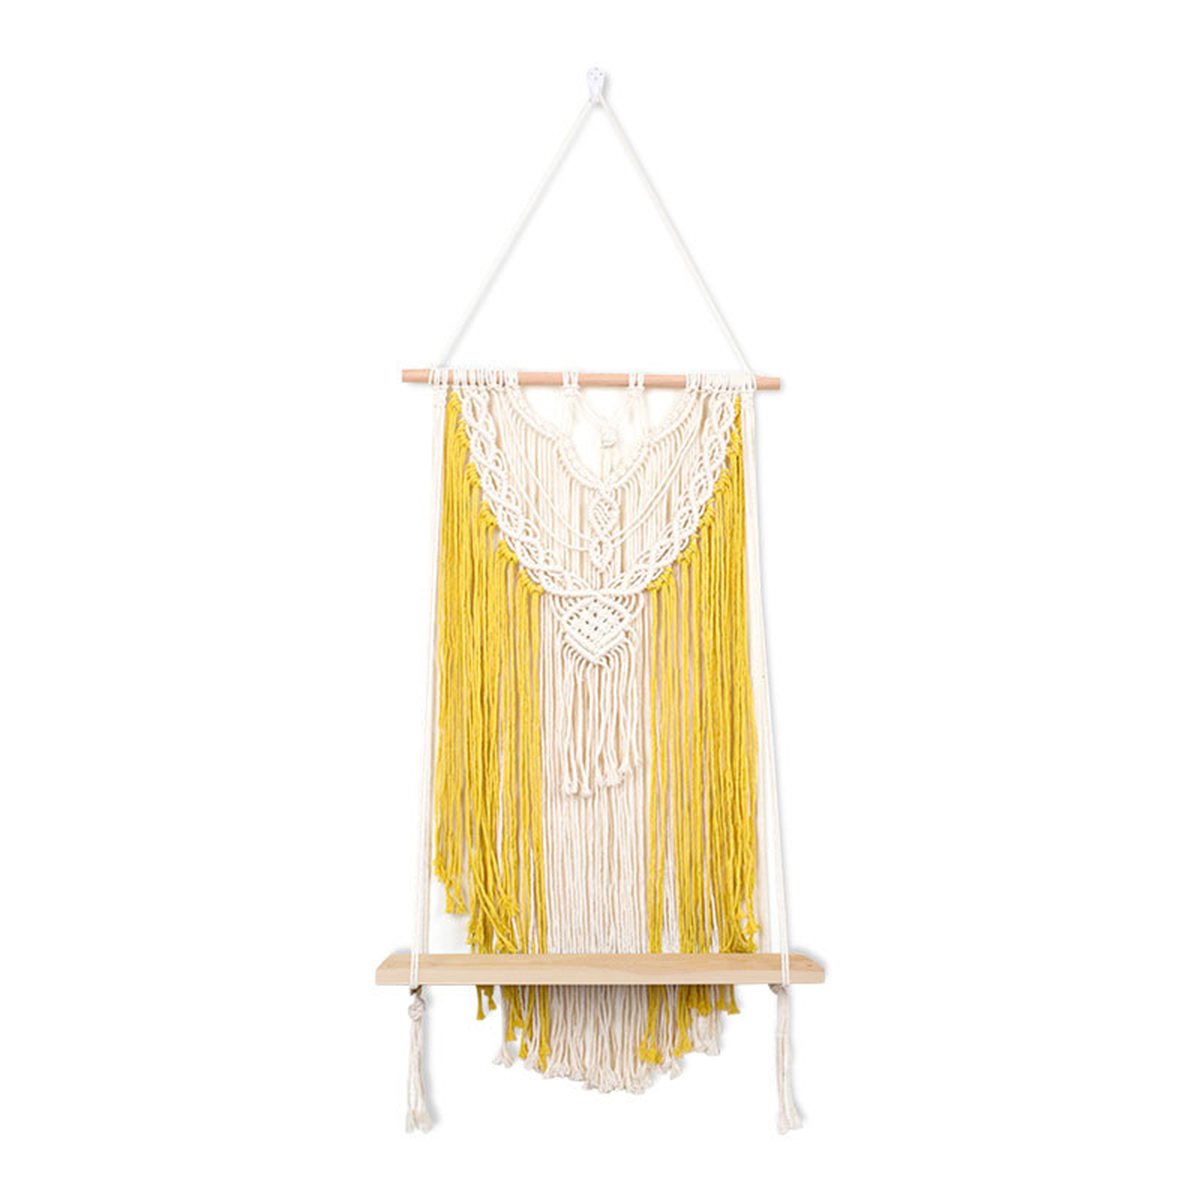 Wall-mounted-Lace-Woven-Macrame-Plant-Hanger-Wall-Cotton-Rope-Tapestry-Shelf-1727270-8